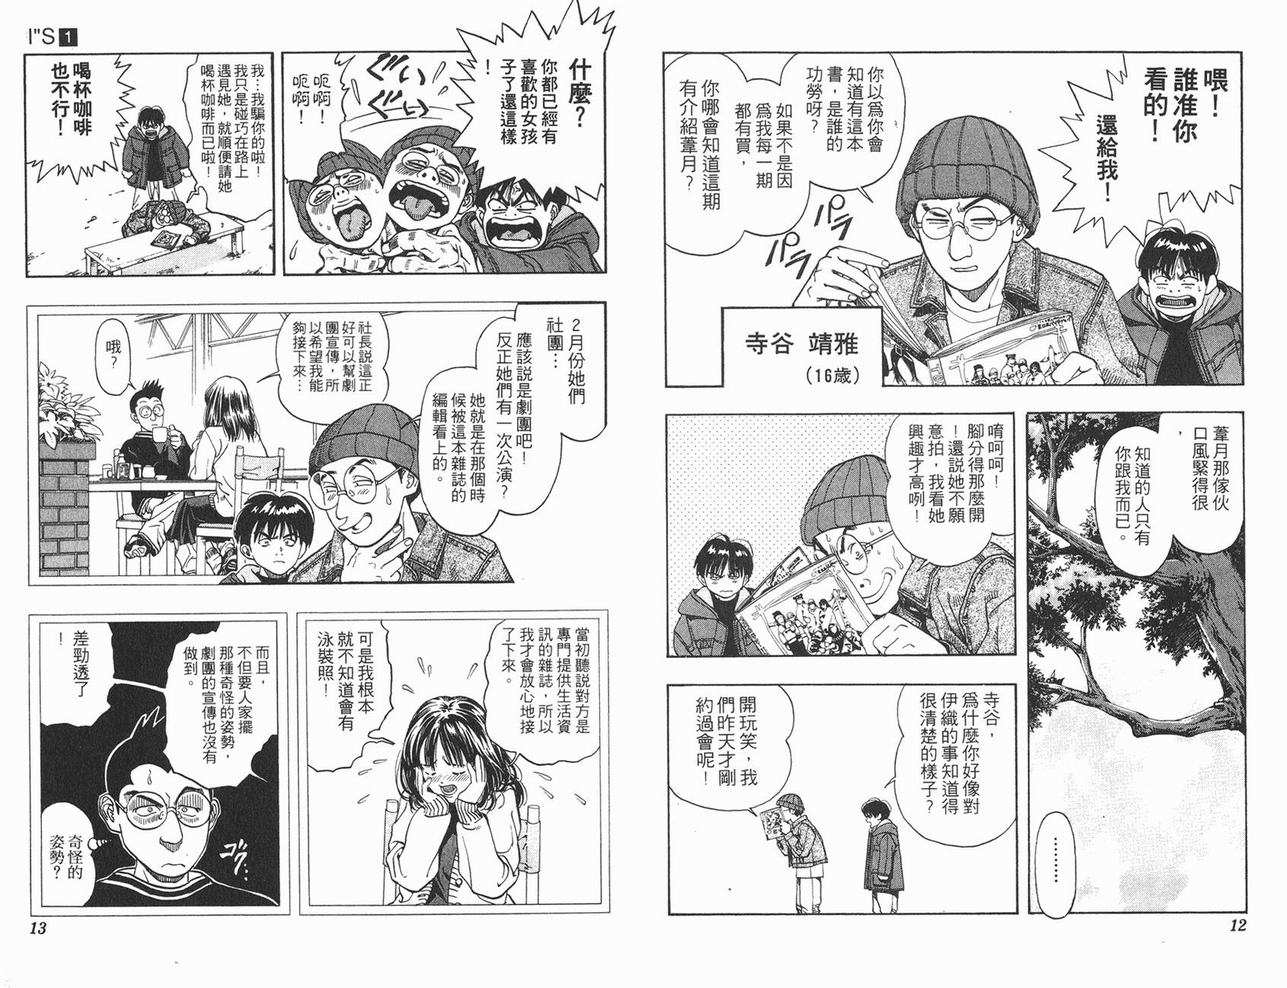 《I`s》漫画 is01卷